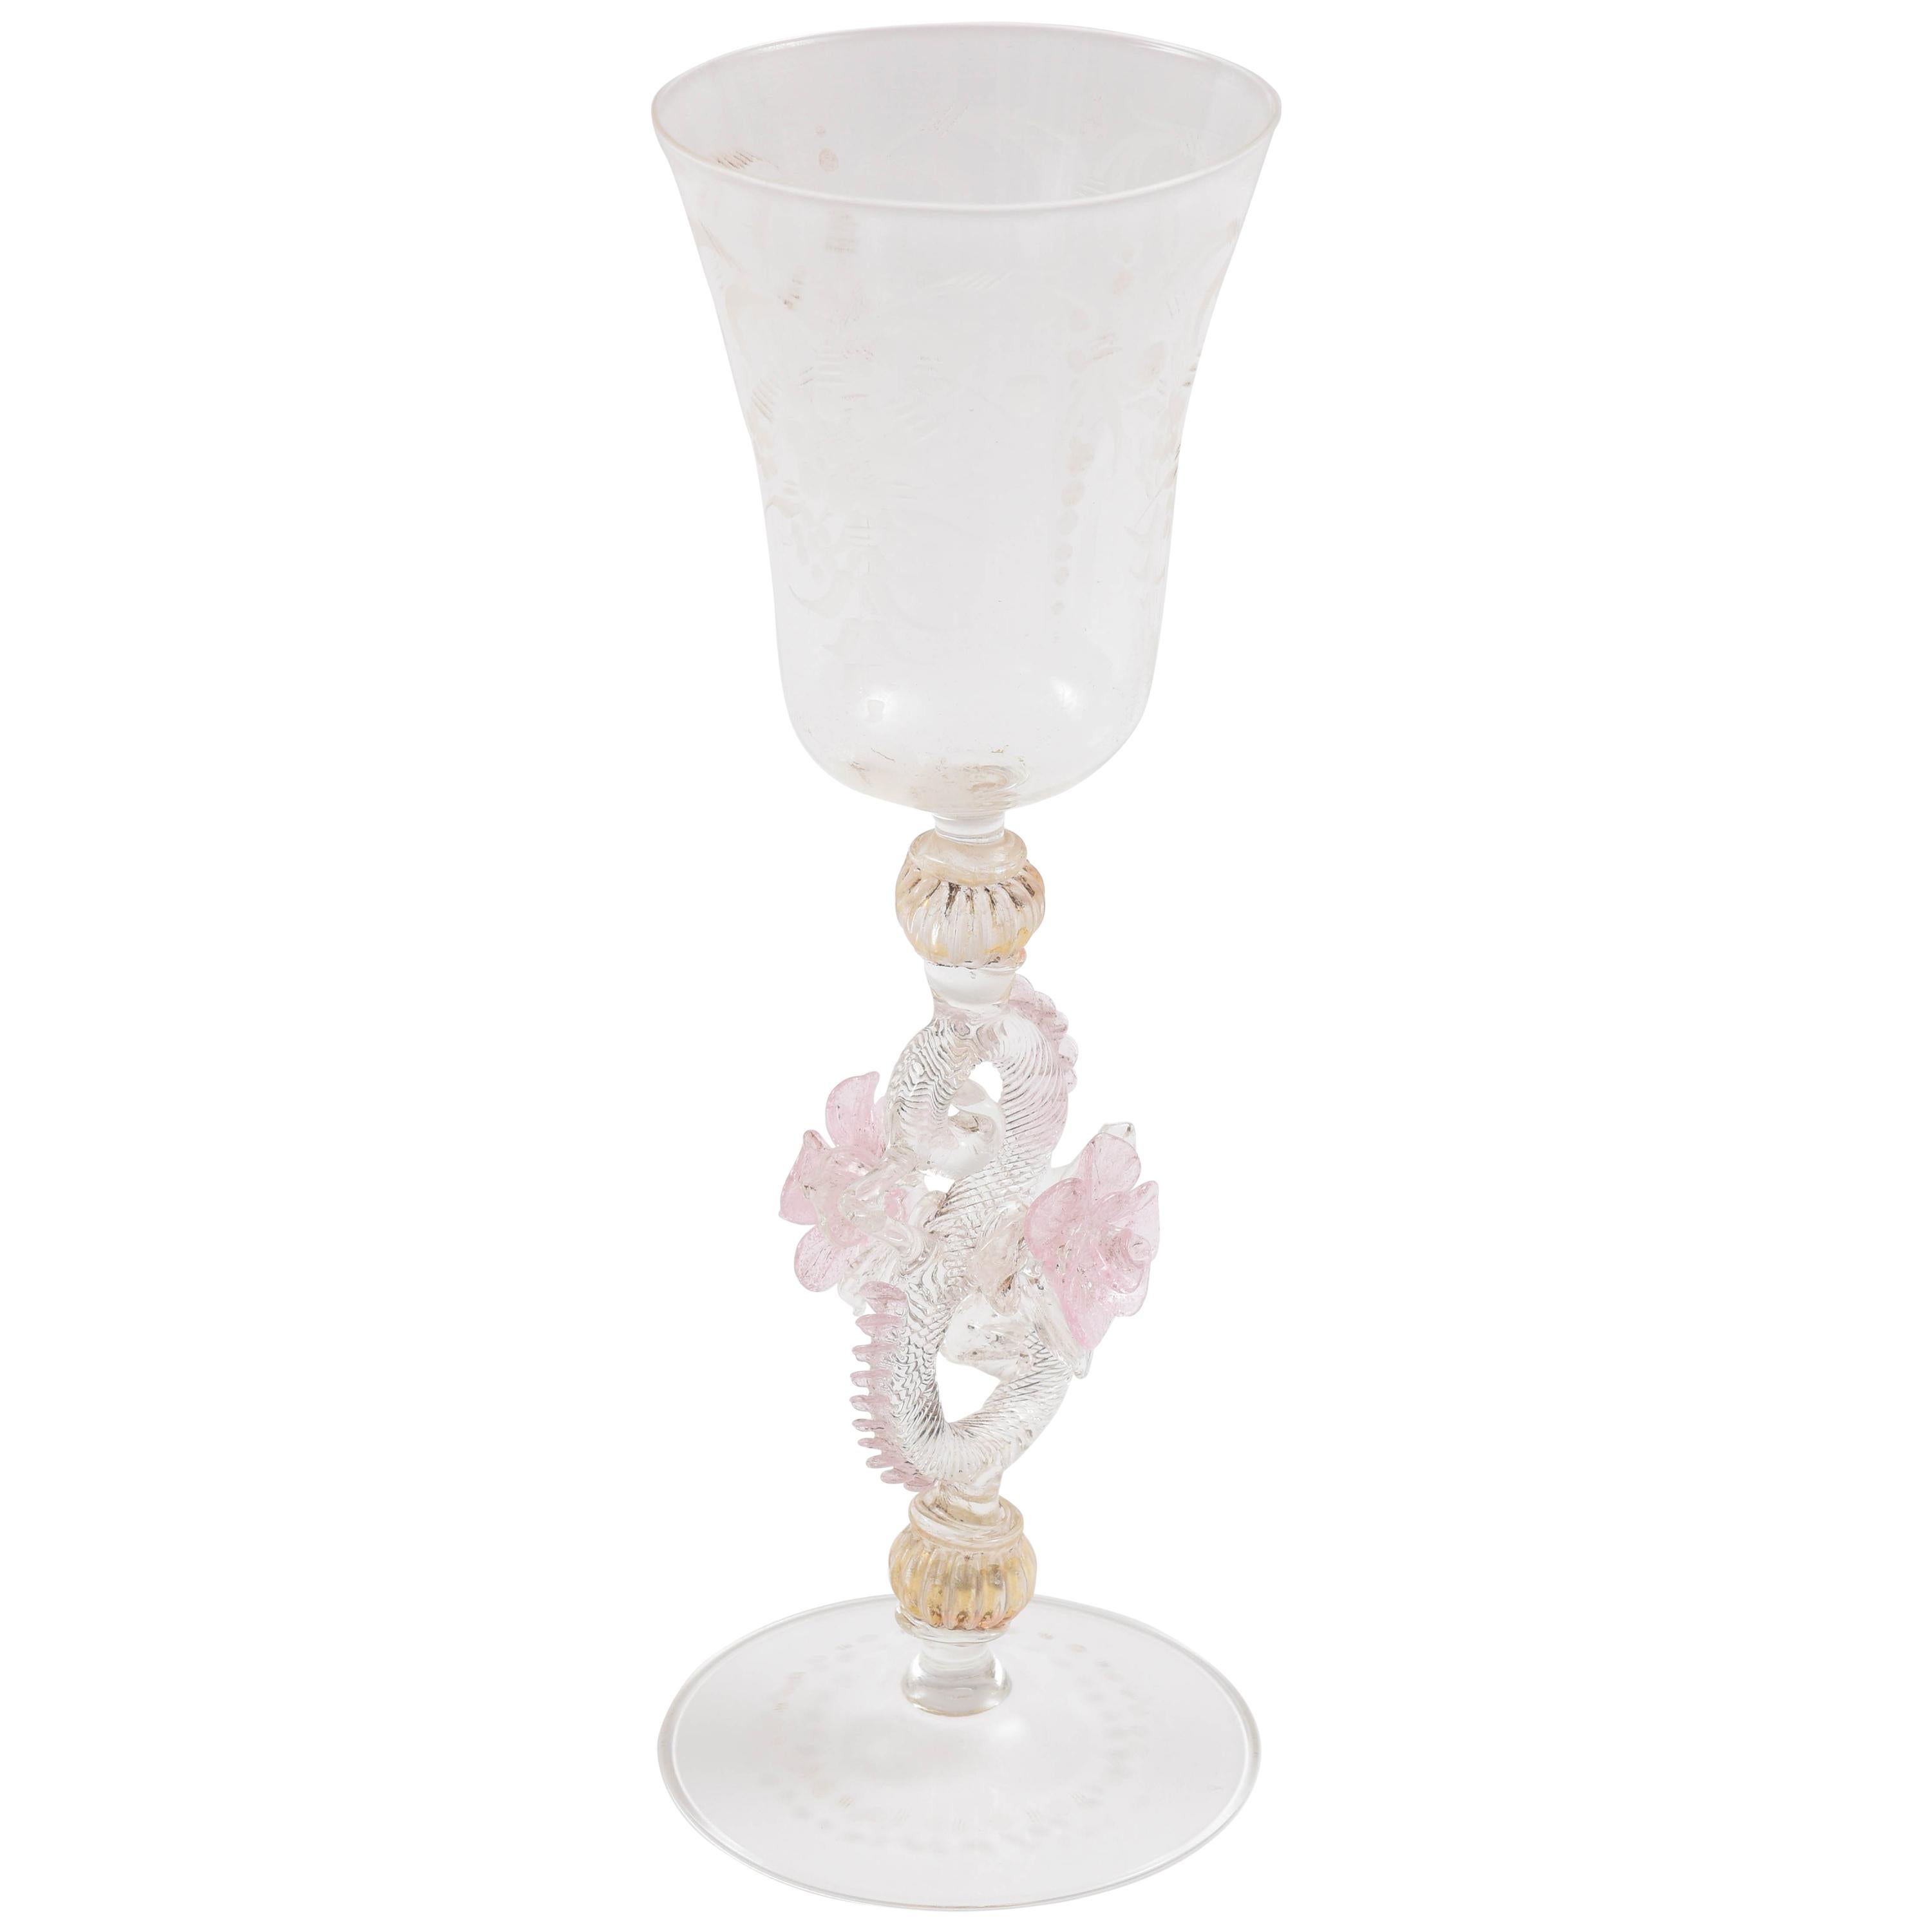 Eight Exquisite Venetian Goblets, Tall and Elaborate